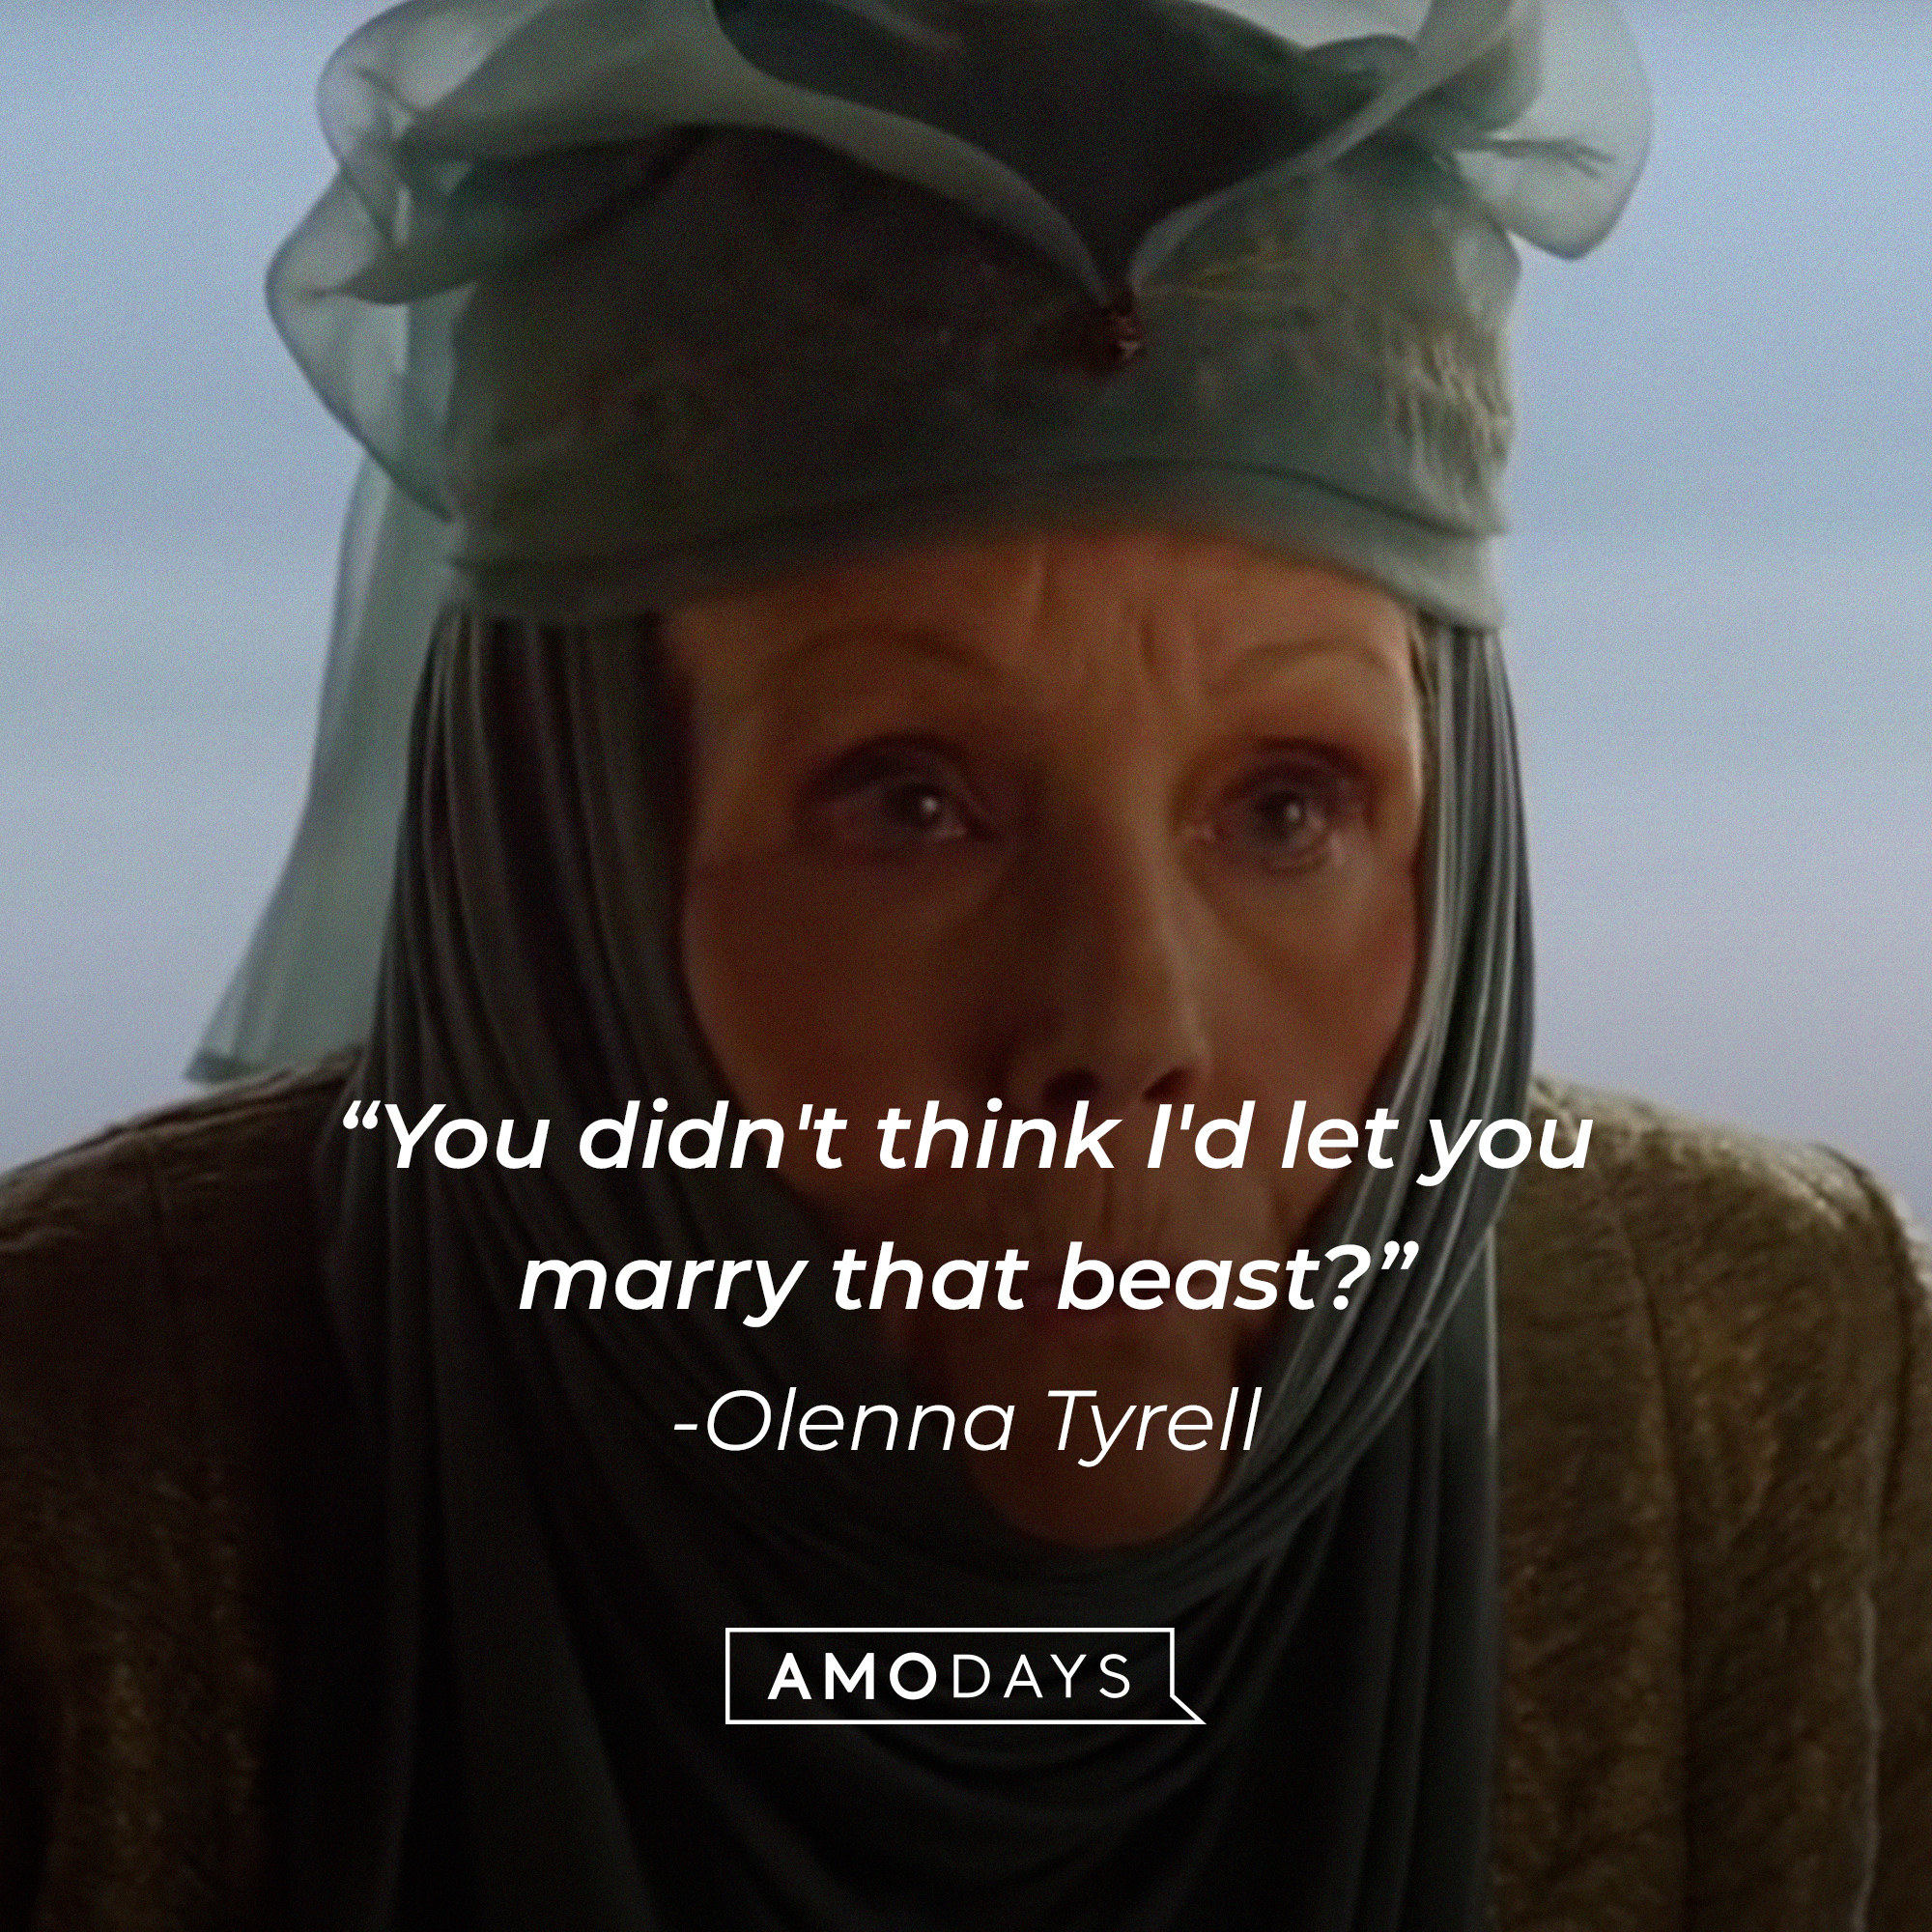 Olenna Tyrell, with her quote: "You didn't think I'd let you marry that beast?"  │Source:  facebook.com/GameOfThrones